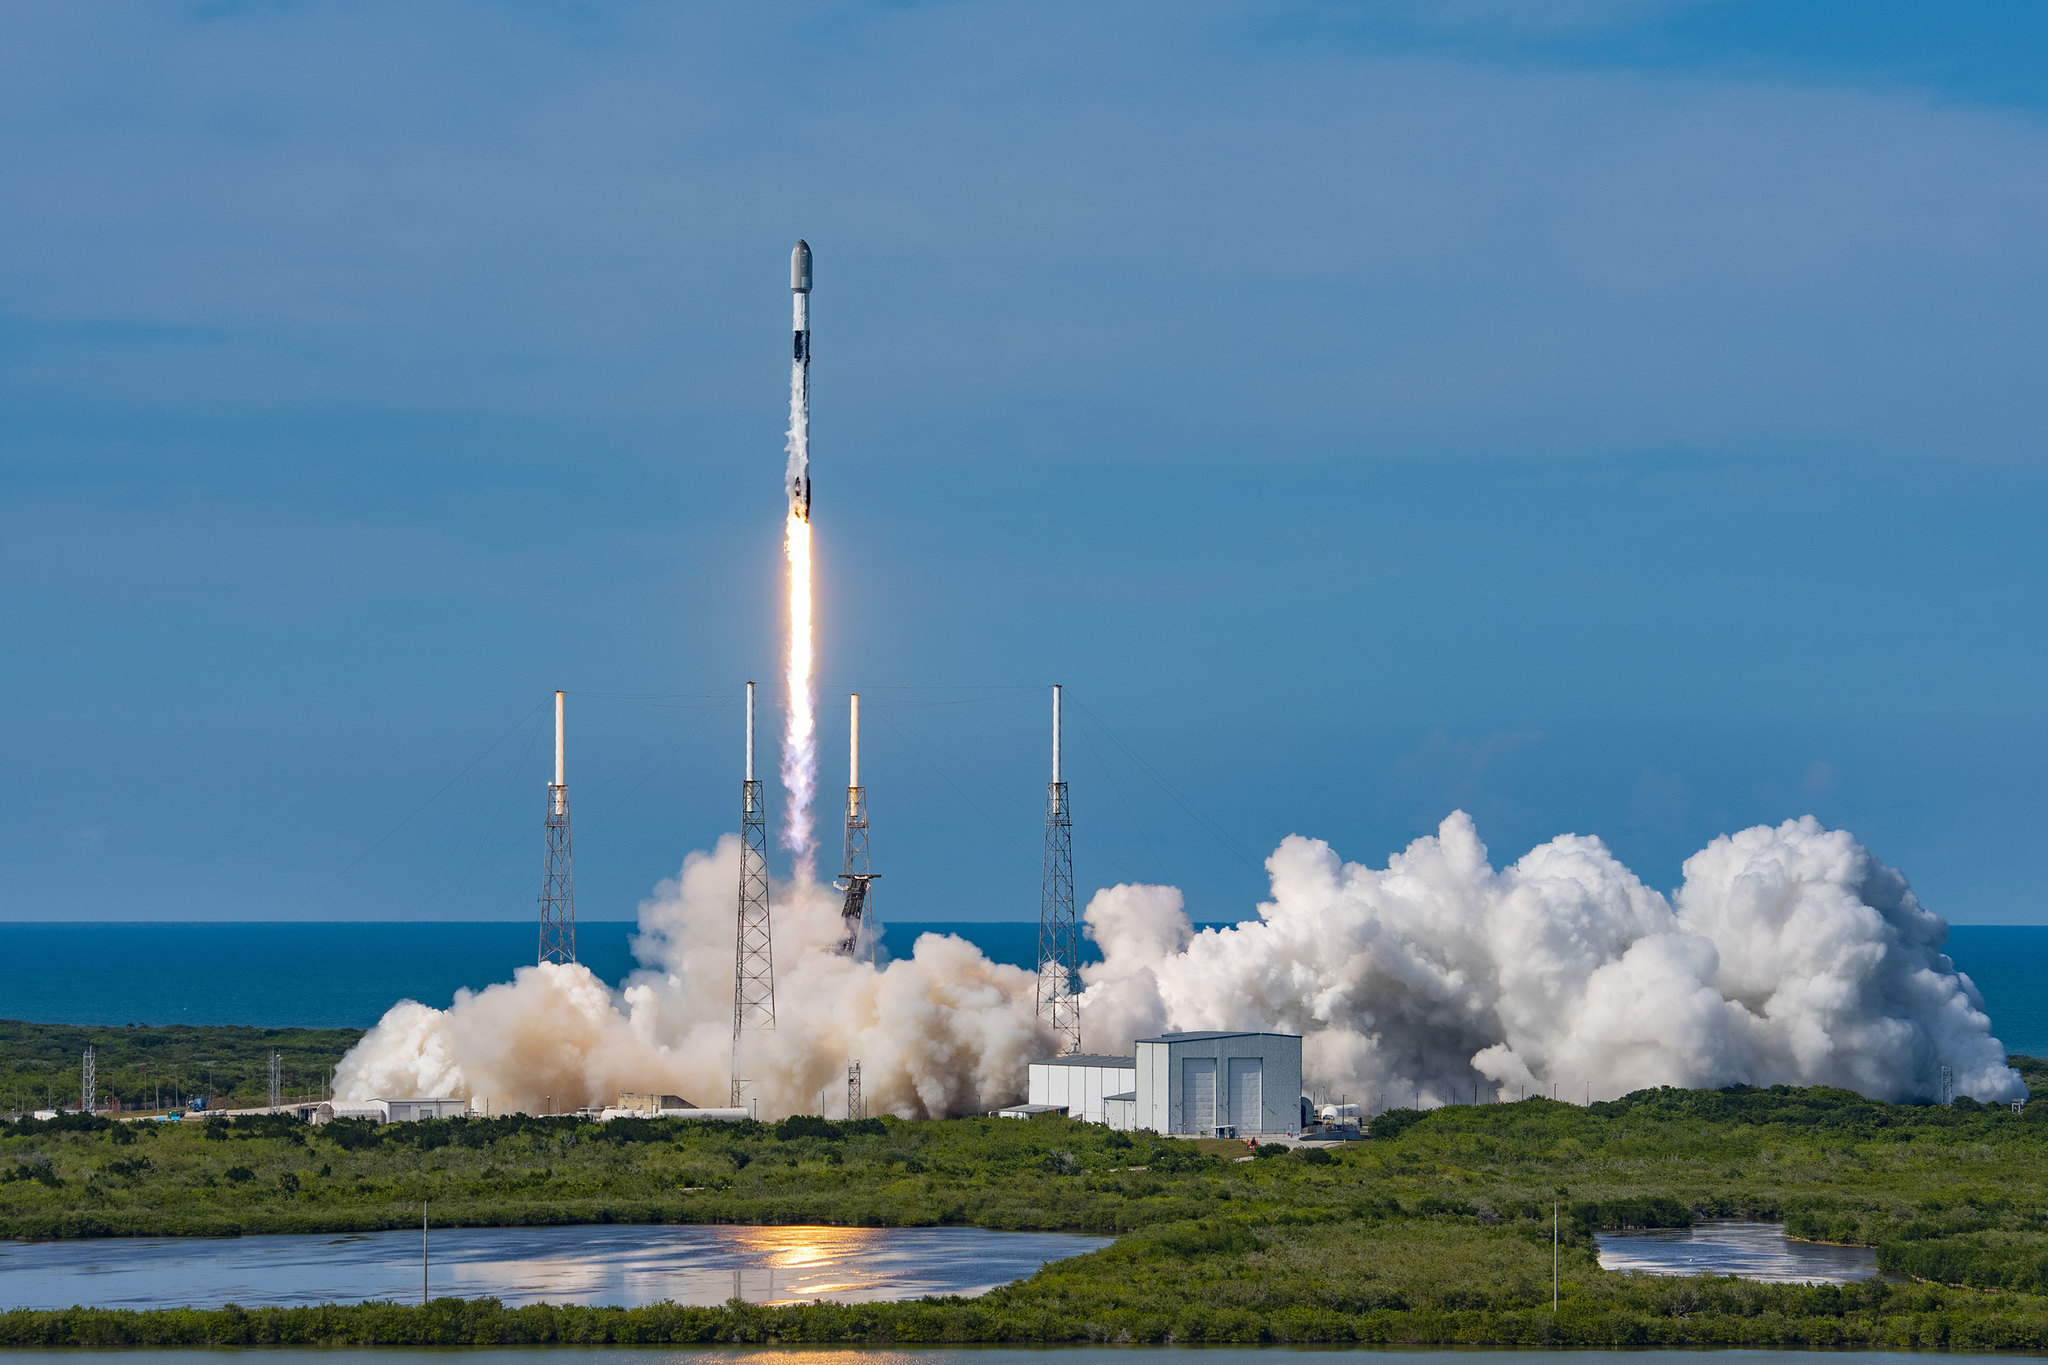 Watch SpaceX rocket launch on record-setting 15th mission Saturday